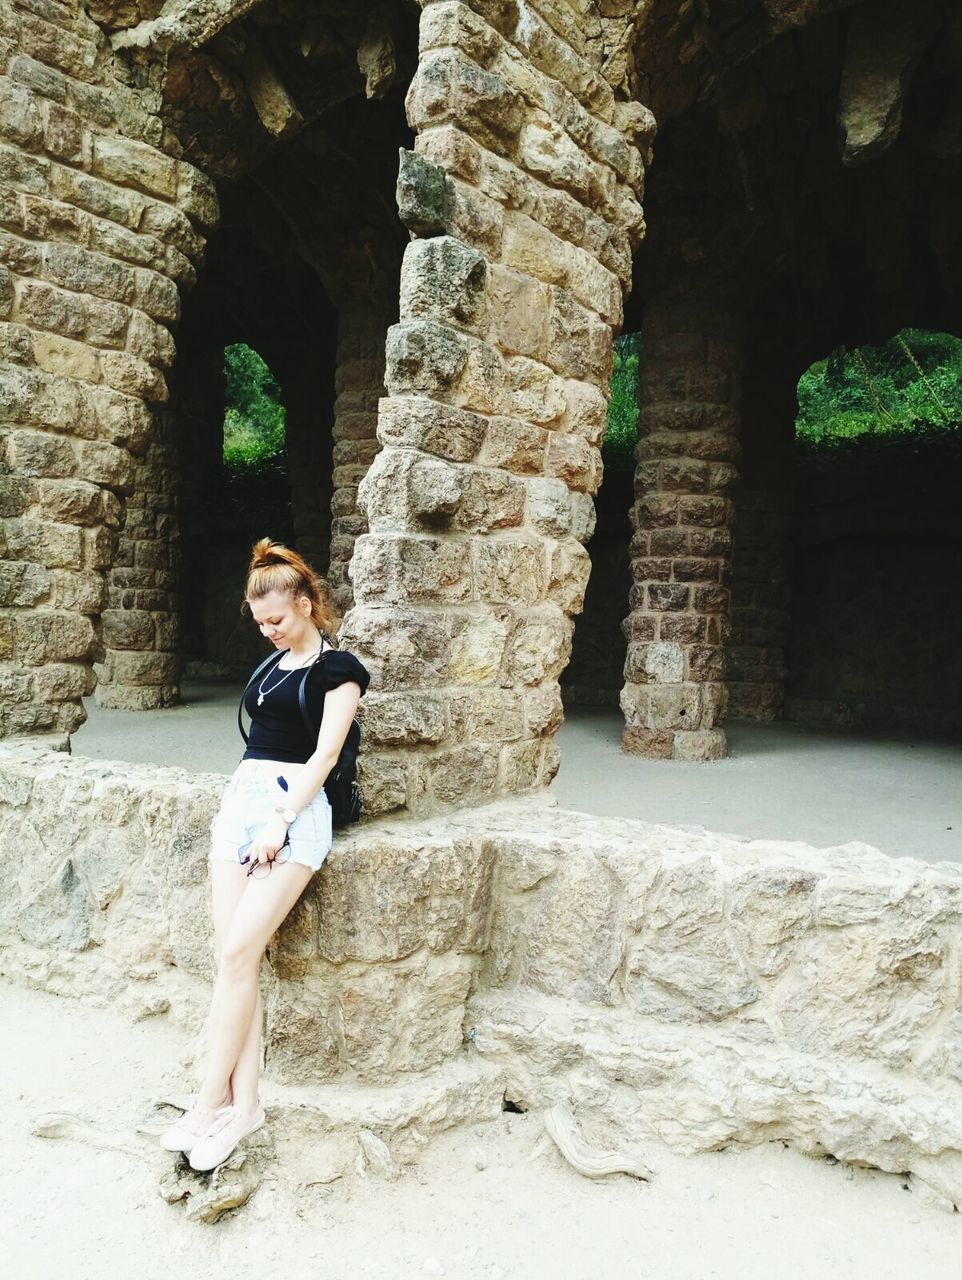 real people, young women, one person, young adult, architecture, lifestyles, arch, looking at camera, leisure activity, full length, built structure, day, rock - object, portrait, casual clothing, standing, front view, posing, sitting, beautiful woman, outdoors, architectural column, old ruin, smiling, building exterior, women